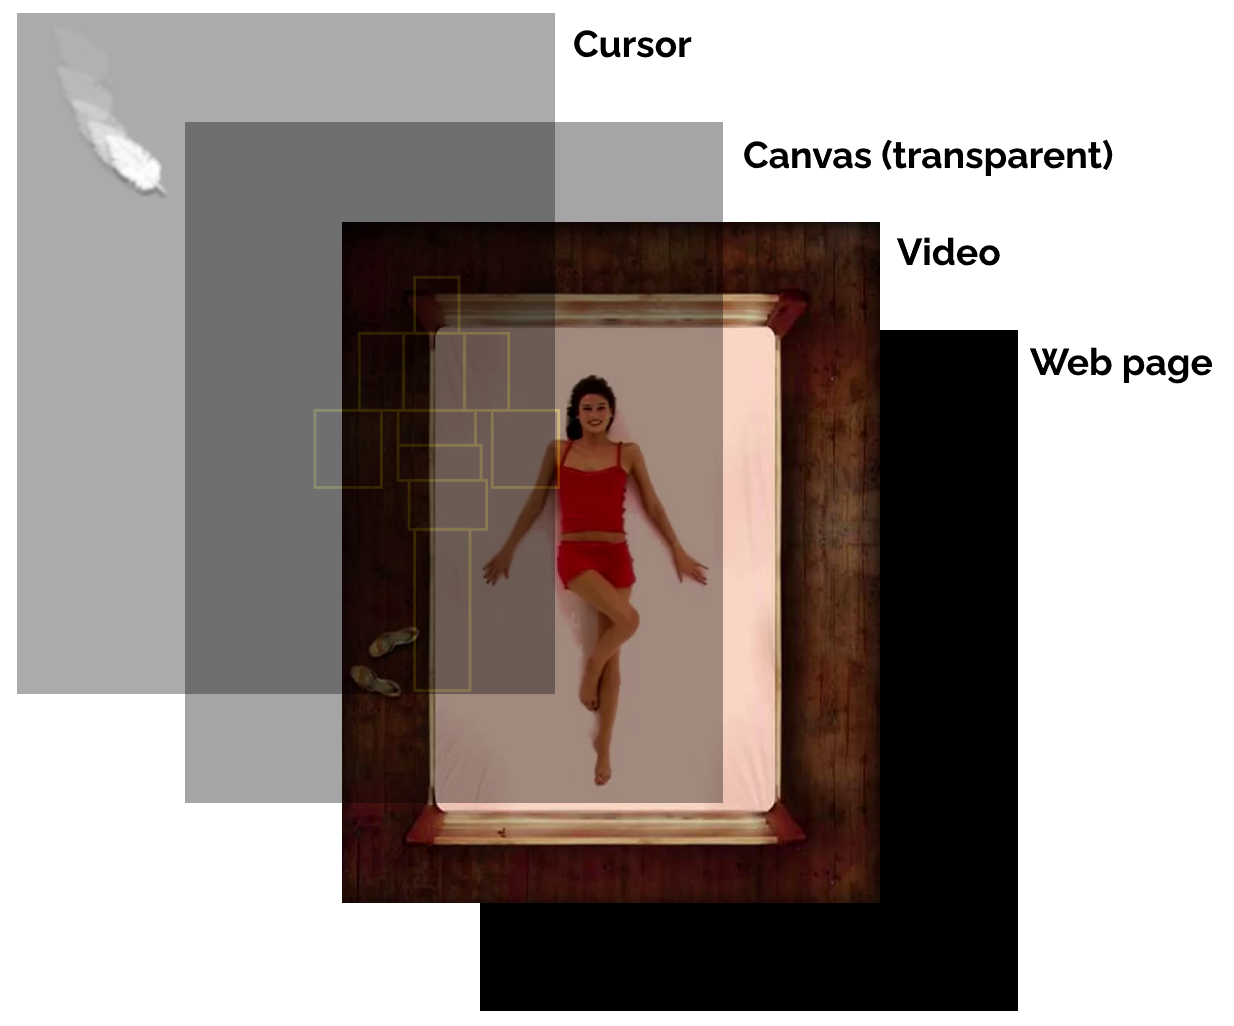 Four layer design. From bottom to top: web page, video (showing woman on bed), (transparent) canvas, cursor (shaped like a feather).